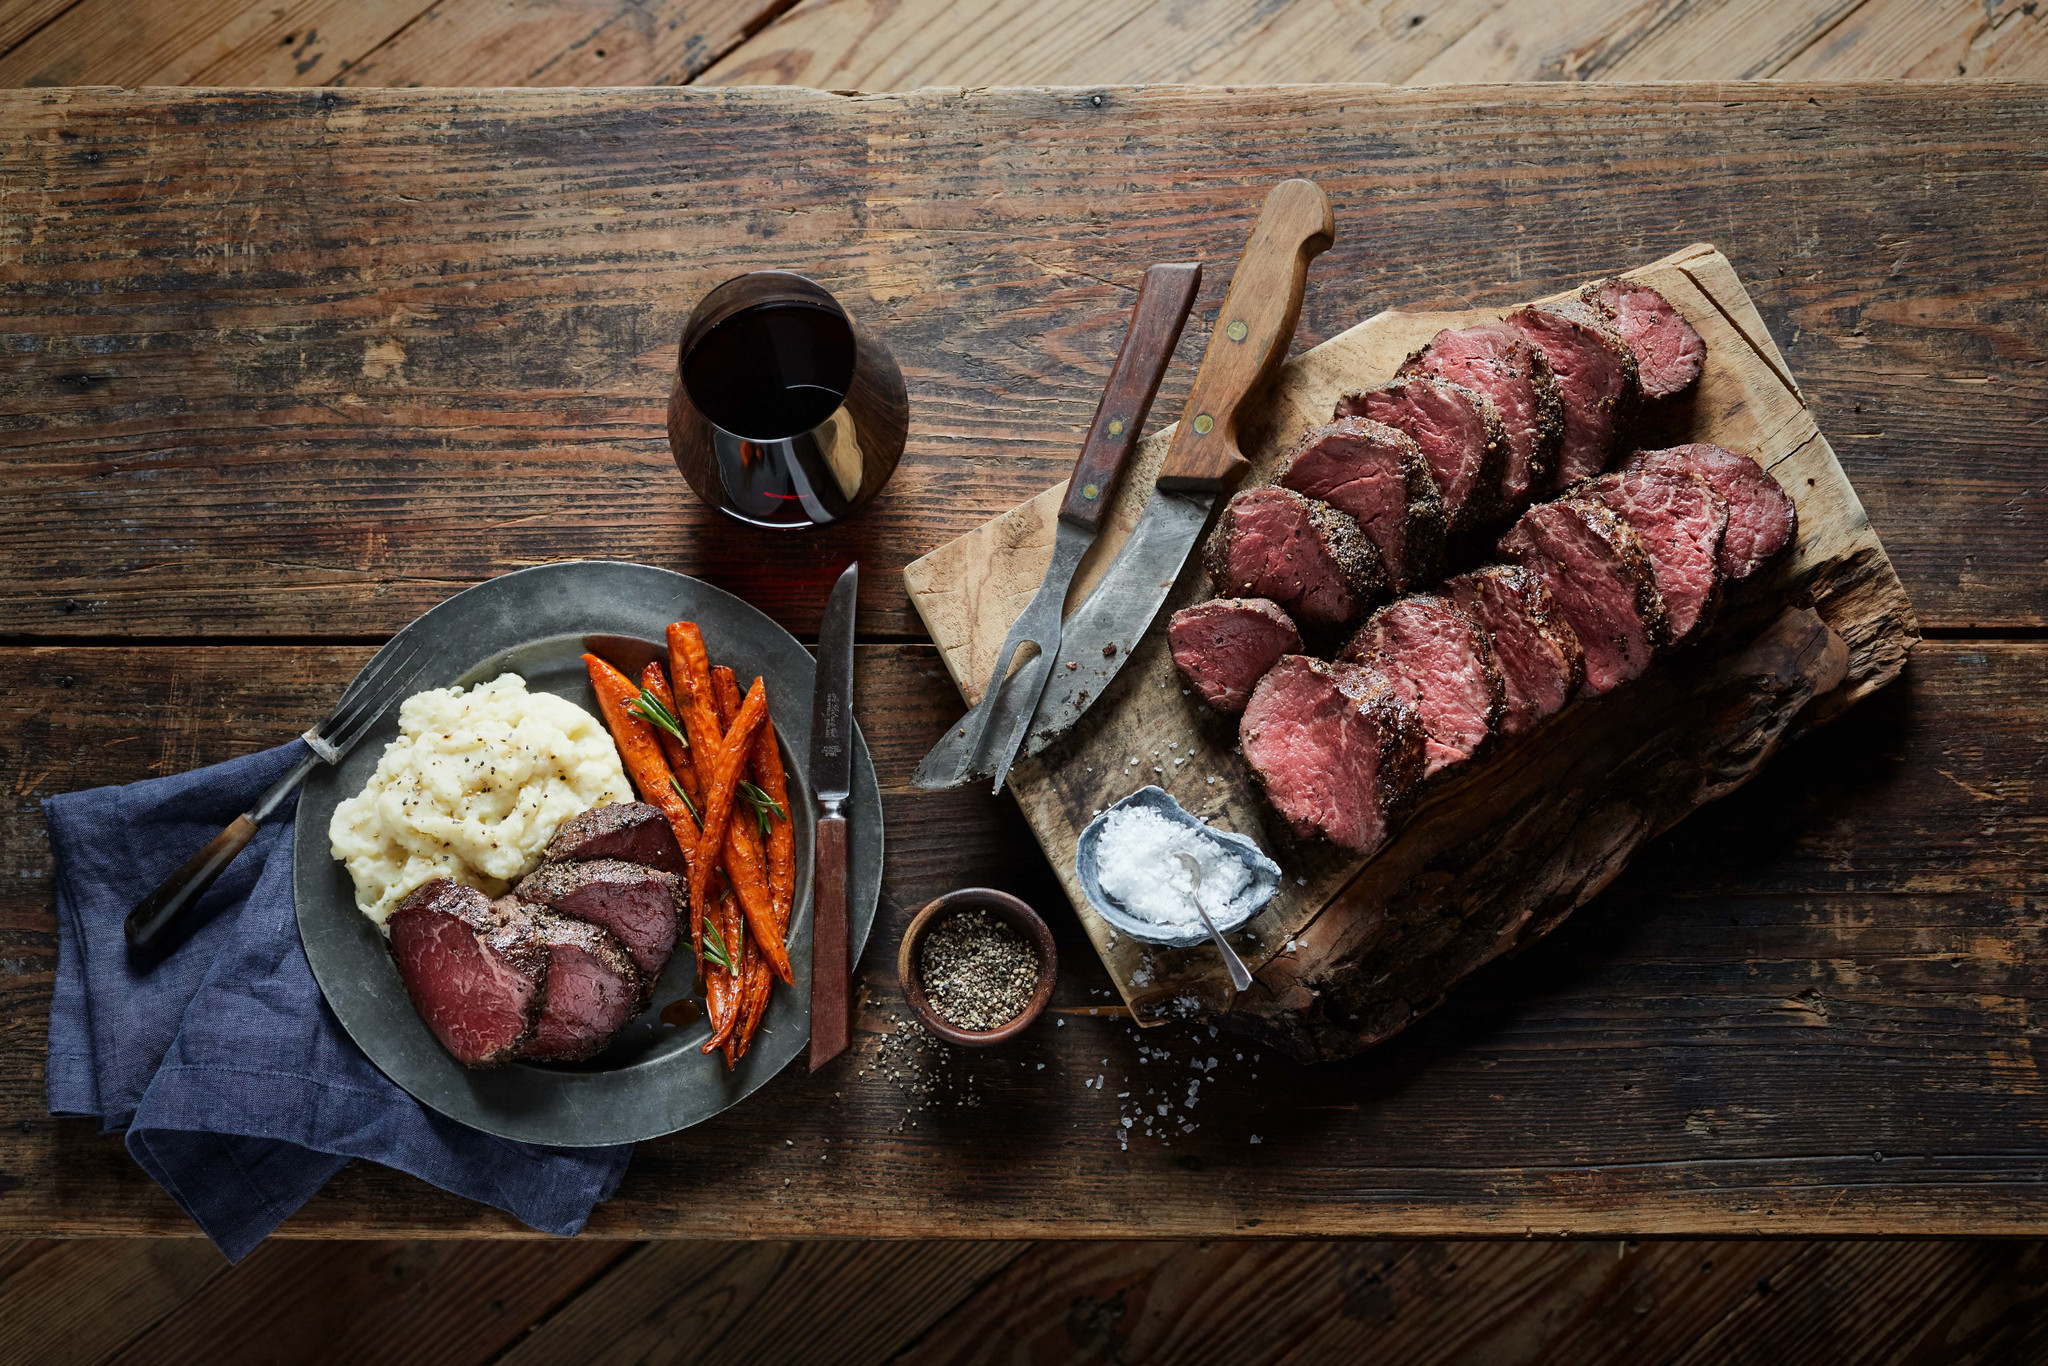 Sliced beef tenderloin, cooked medium rare, laid on a wooden cutting board next to a plate with a serving of beef and vegetables.